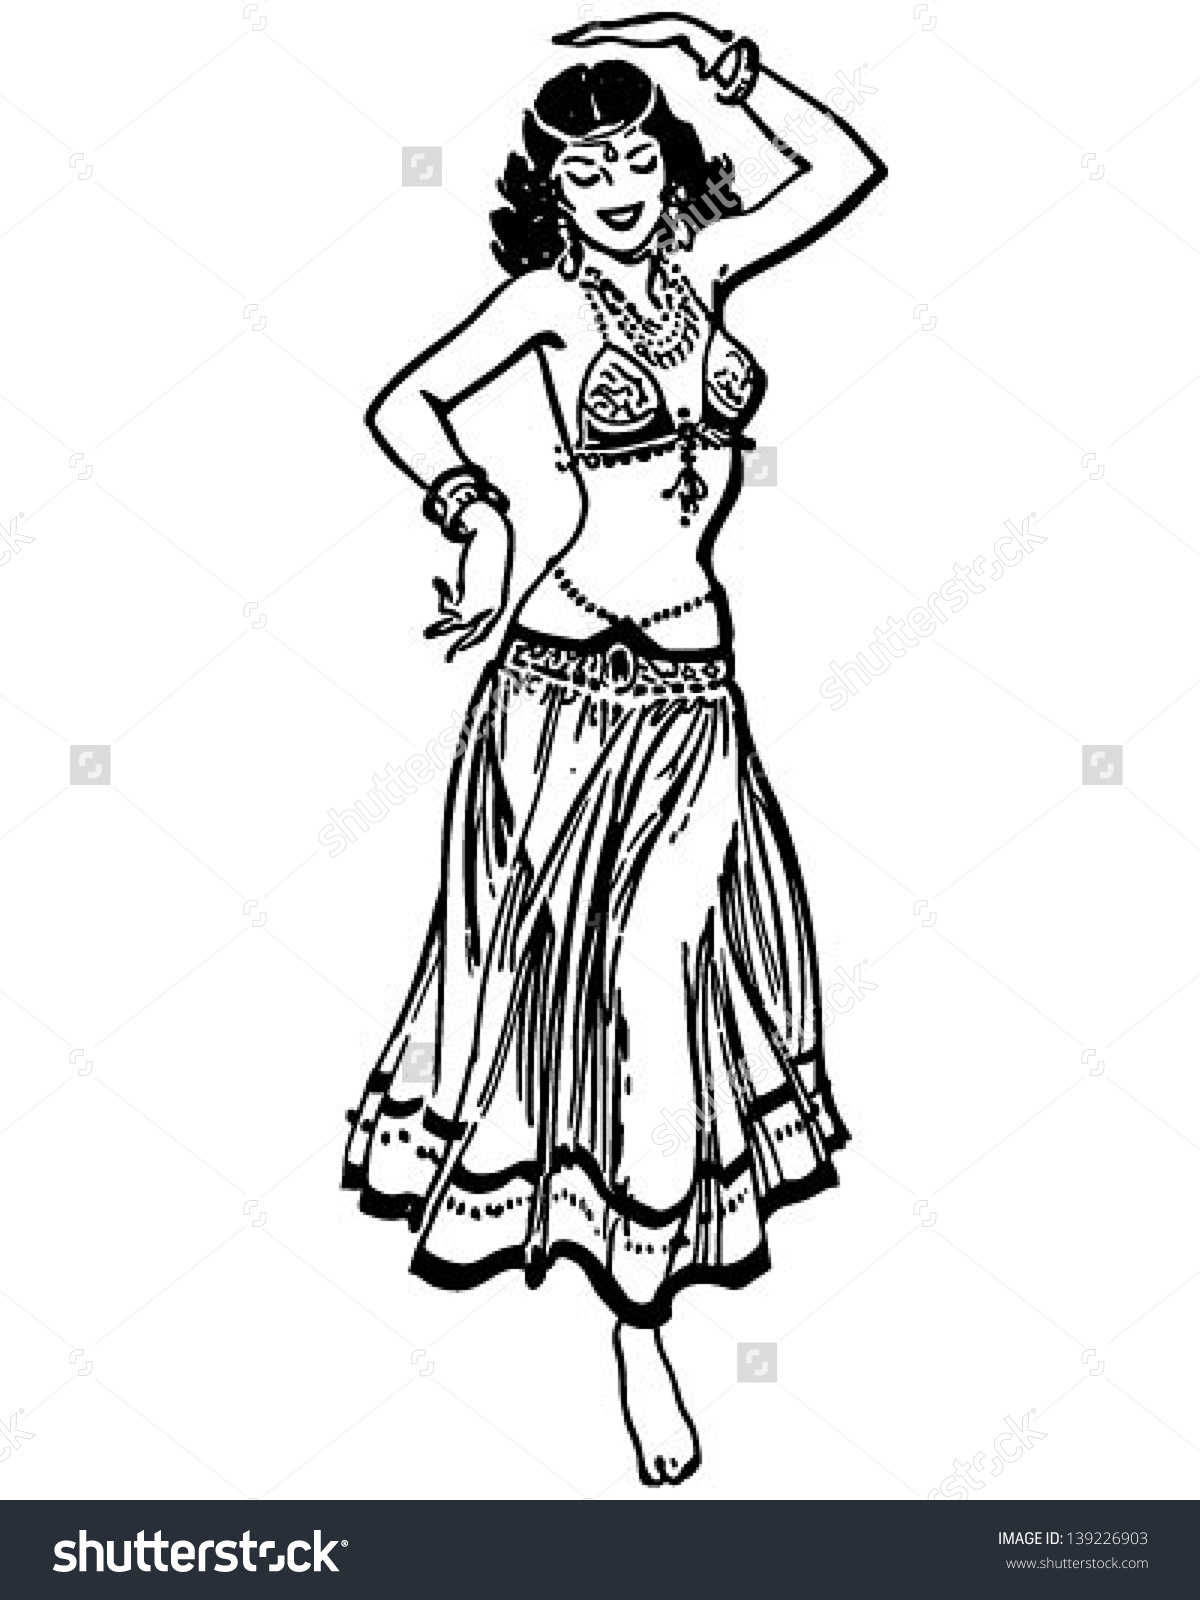 Belly dancing clipart.